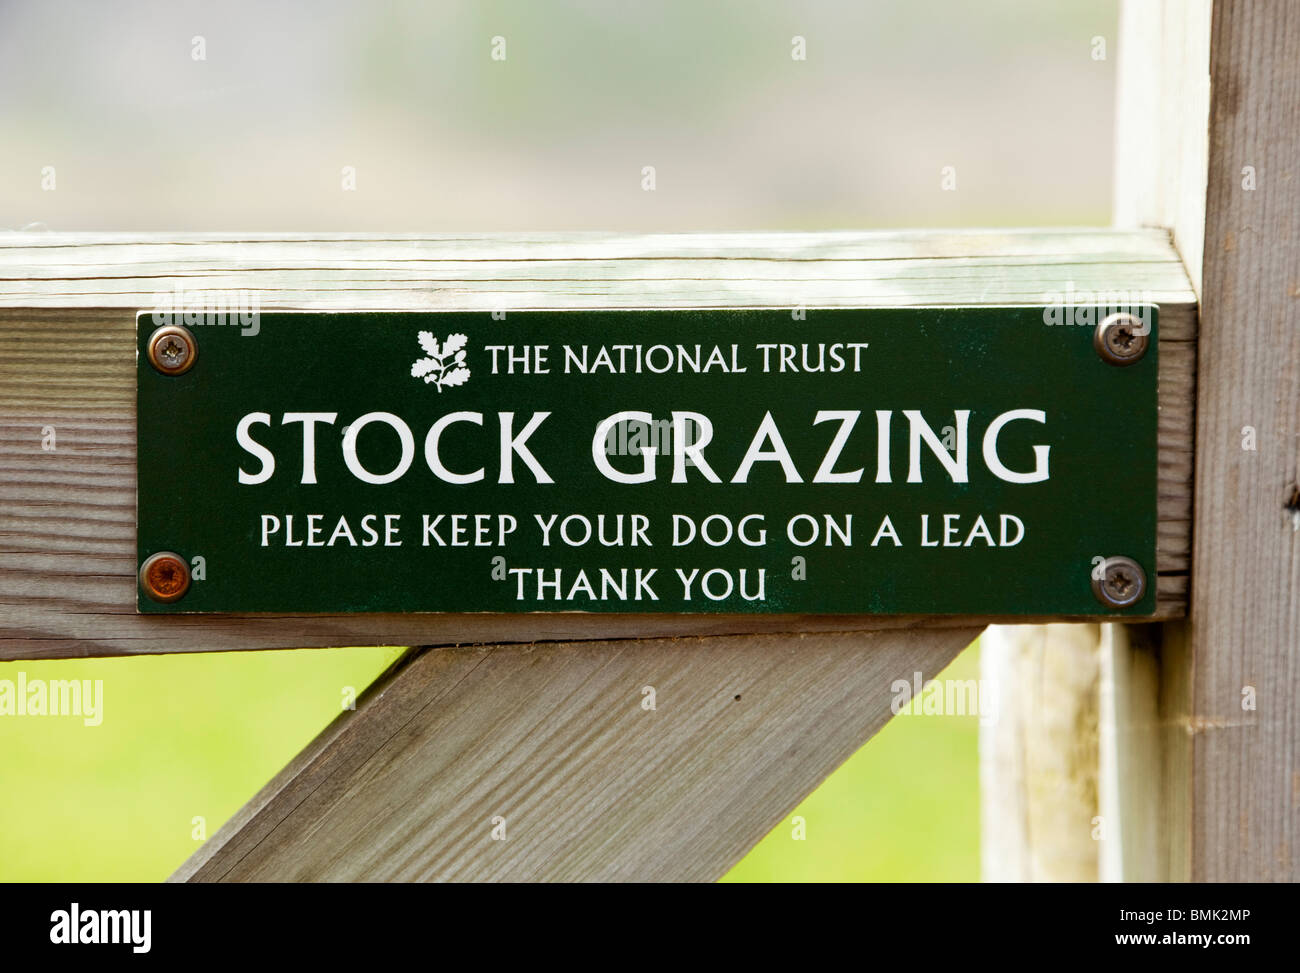 National Trust sign advising of stock grazing and to keep dogs on a lead England UK Stock Photo